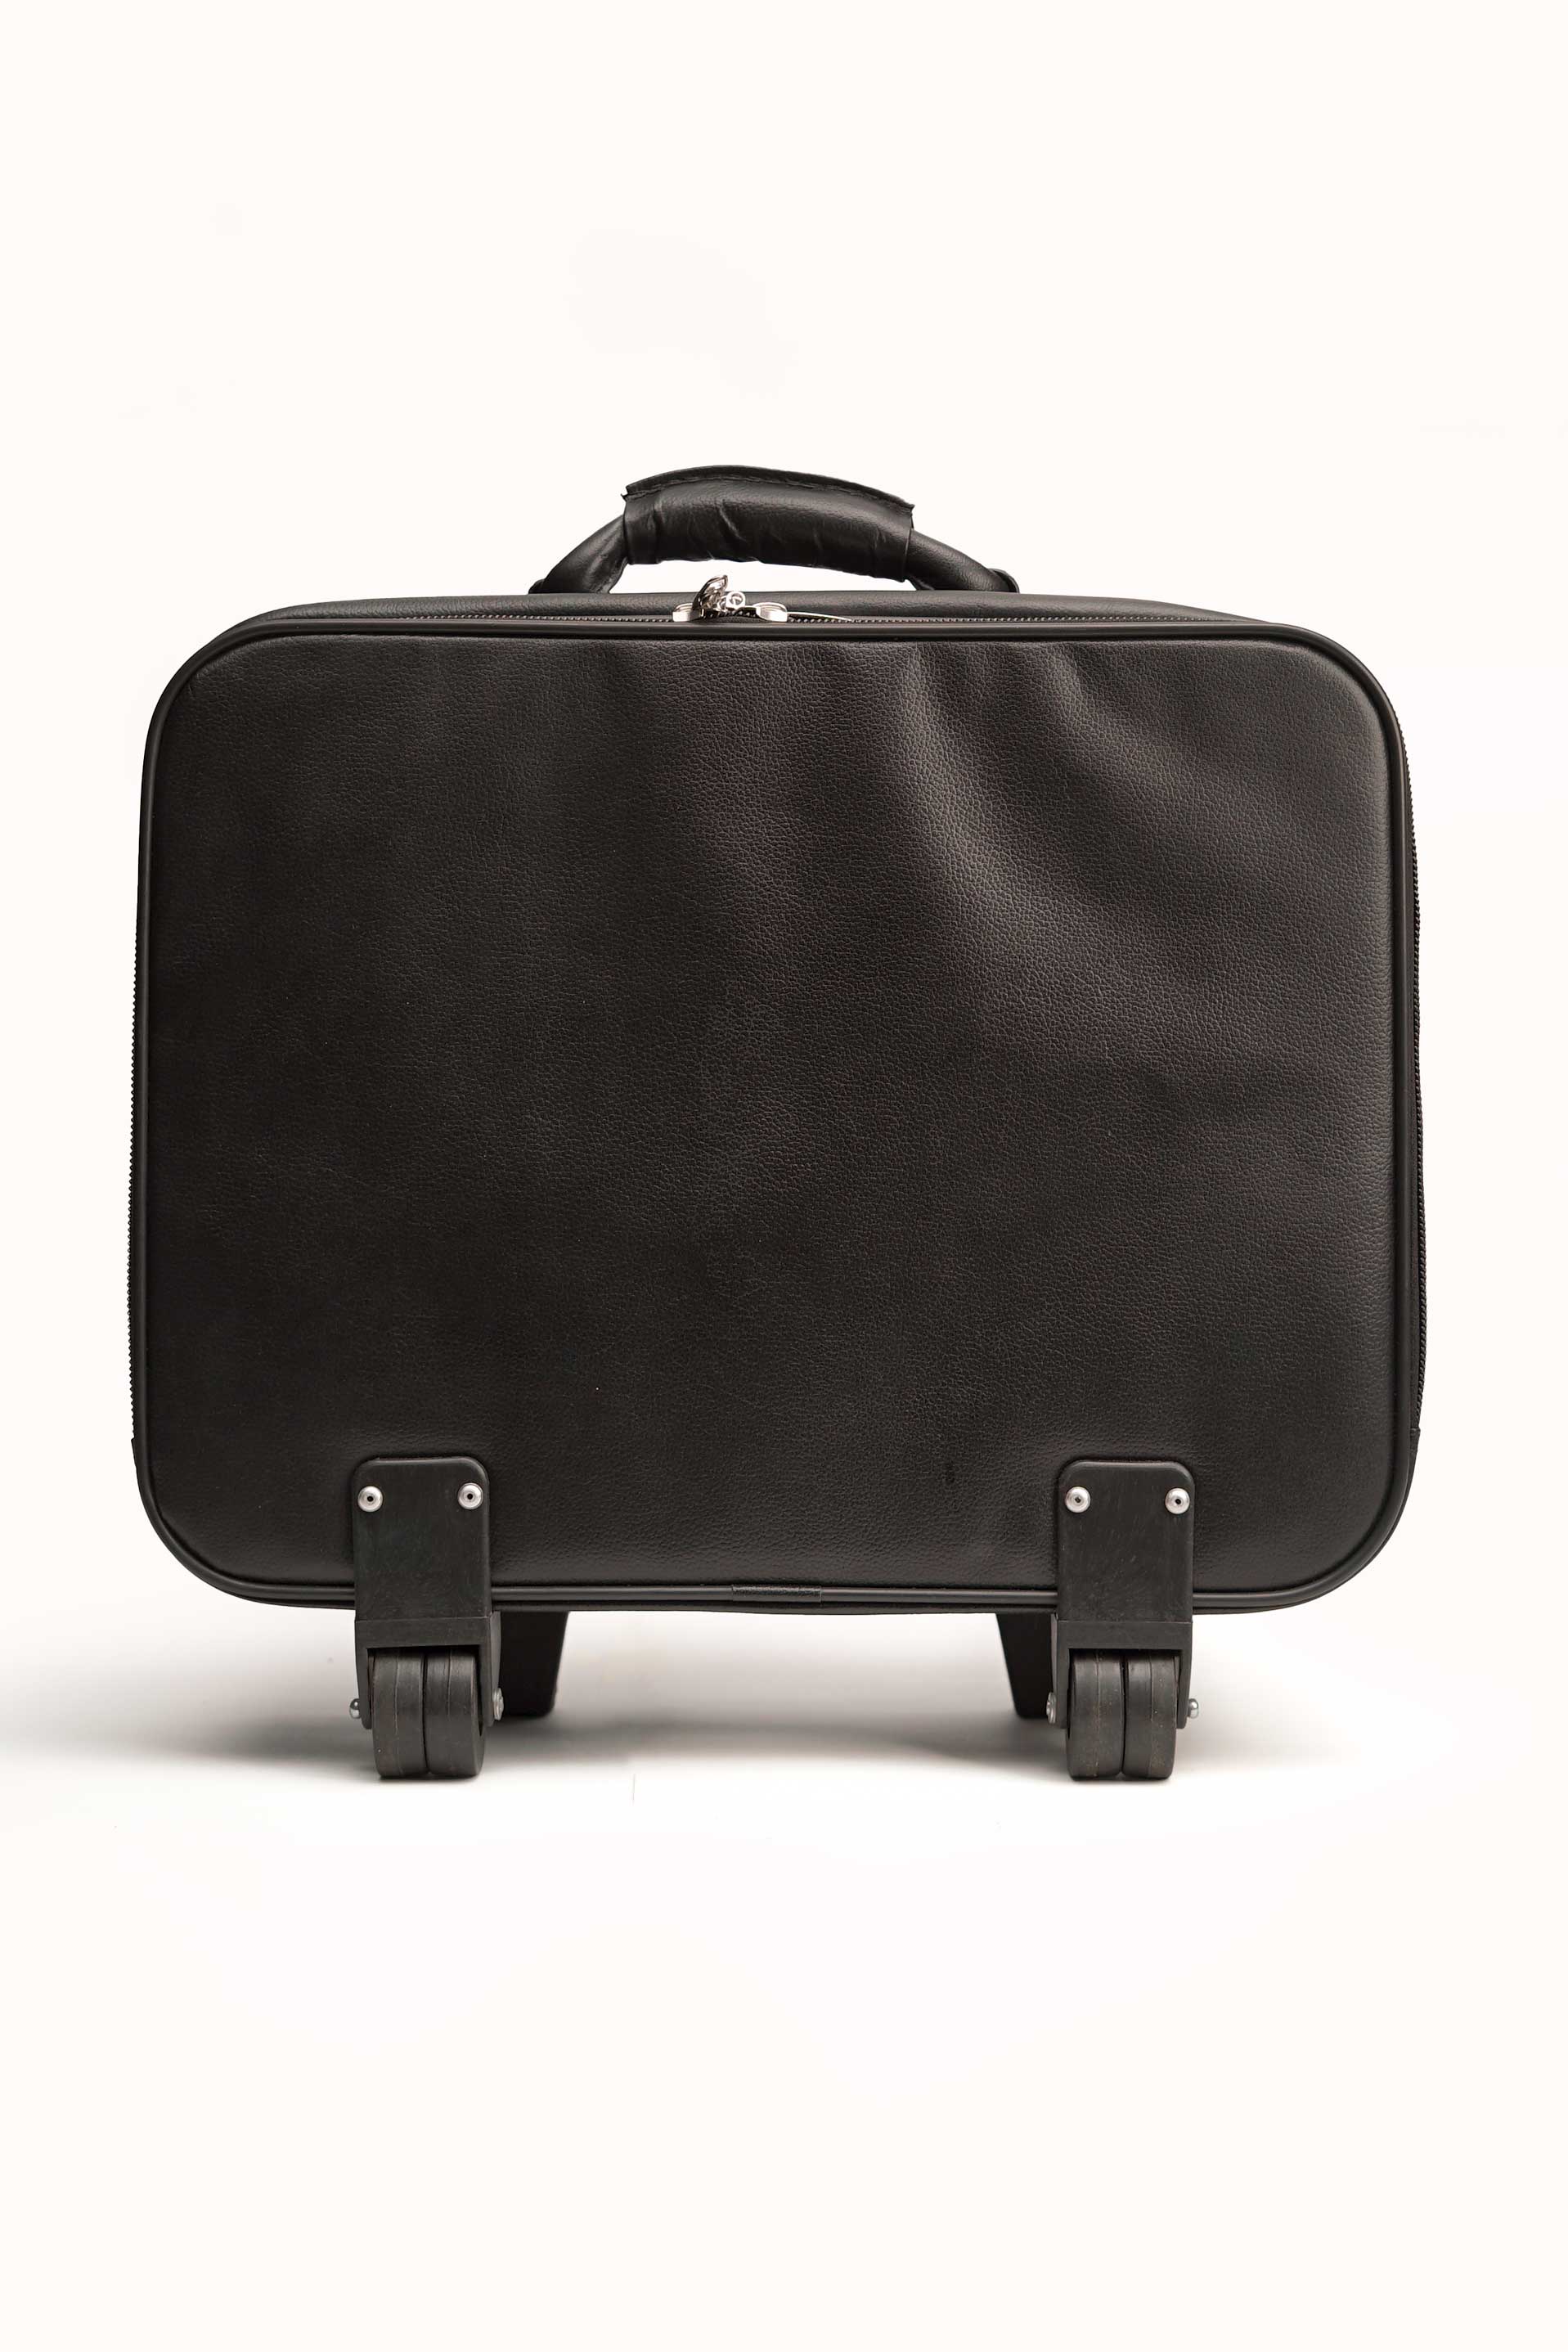 The Travel Mate Trolley Bag